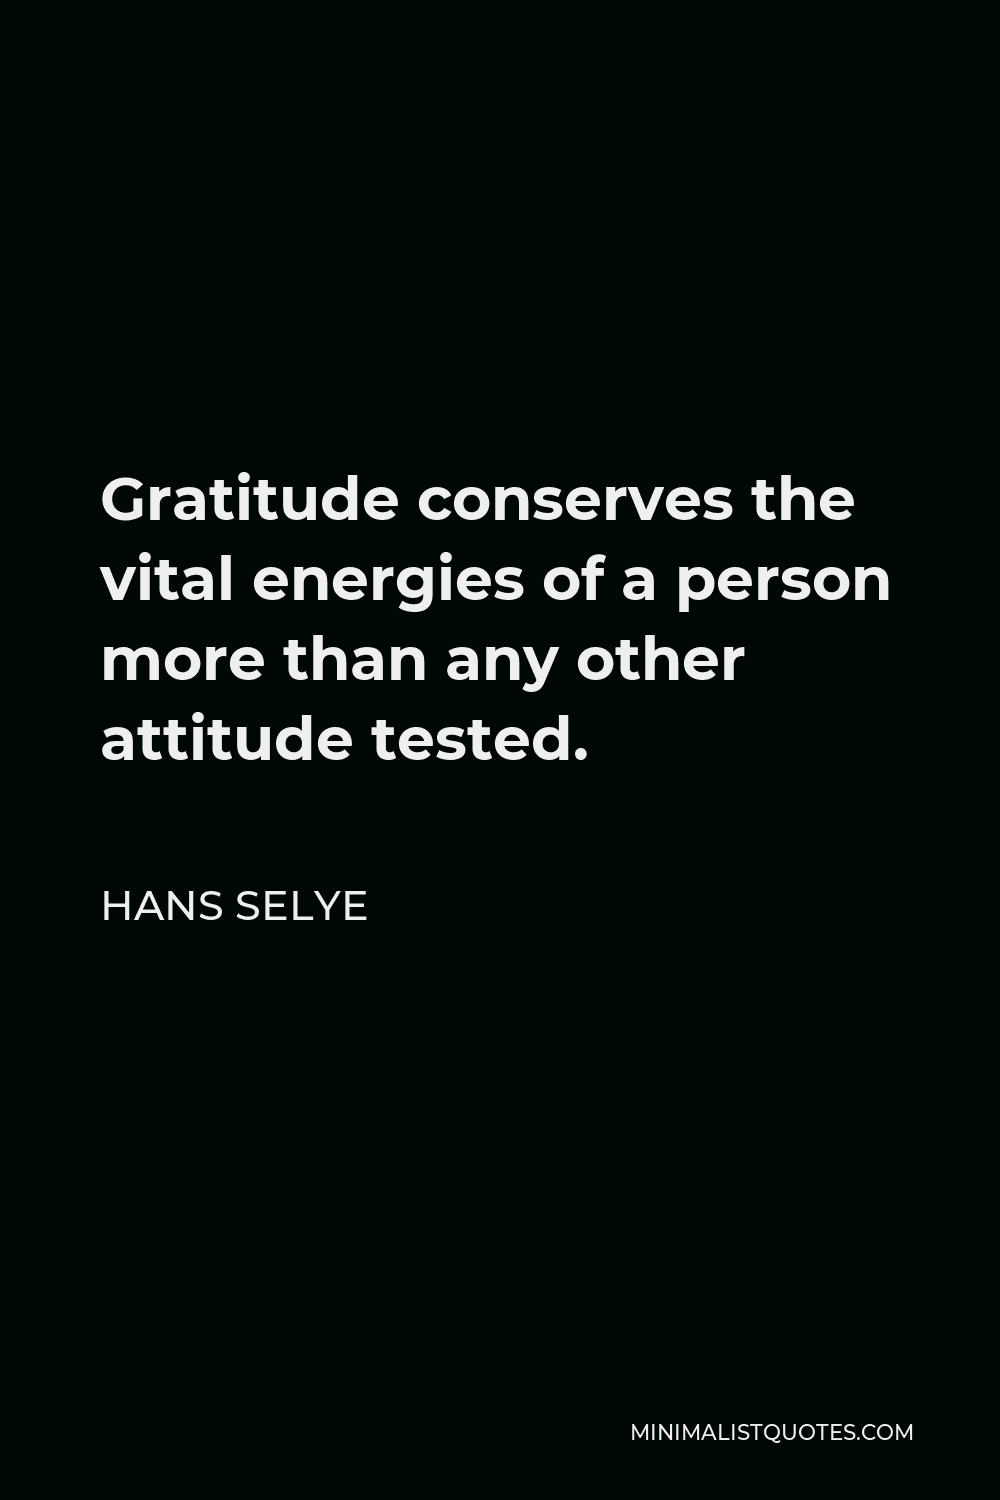 Hans Selye Quote - Gratitude conserves the vital energies of a person more than any other attitude tested.